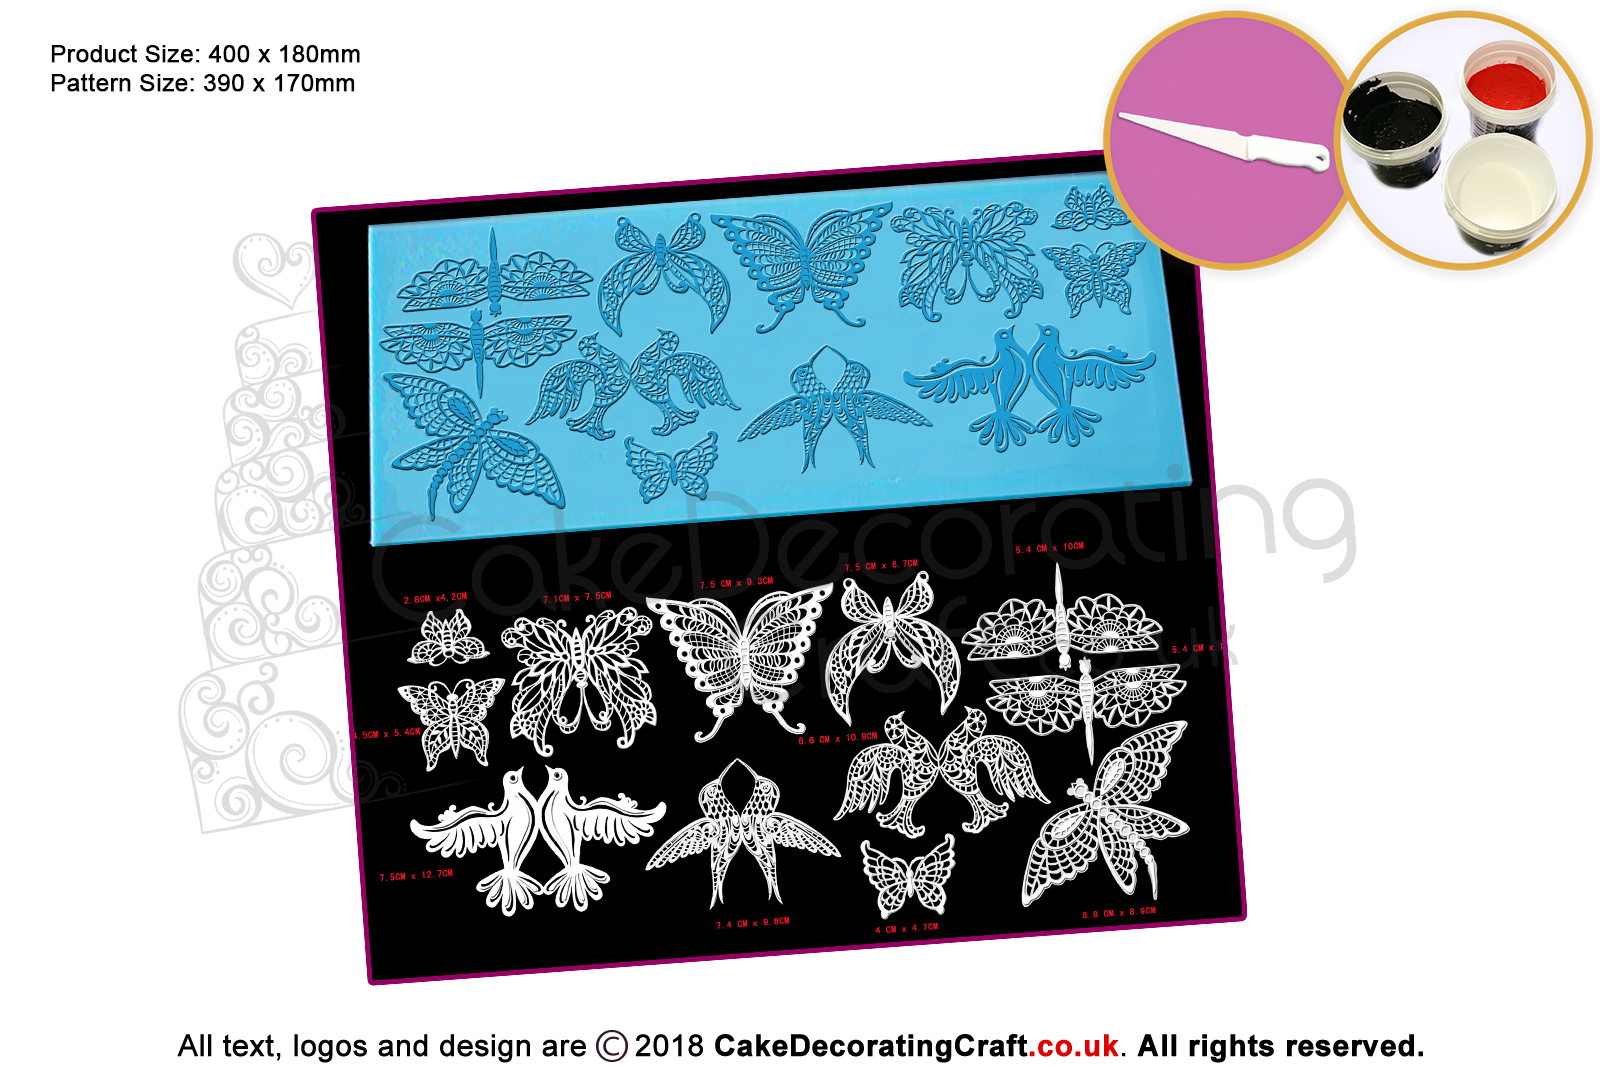 3D Birds and Butterfly | Cake Lace Mats | Cake Decorating Starter Kit | Cake Decorating Craft Tool